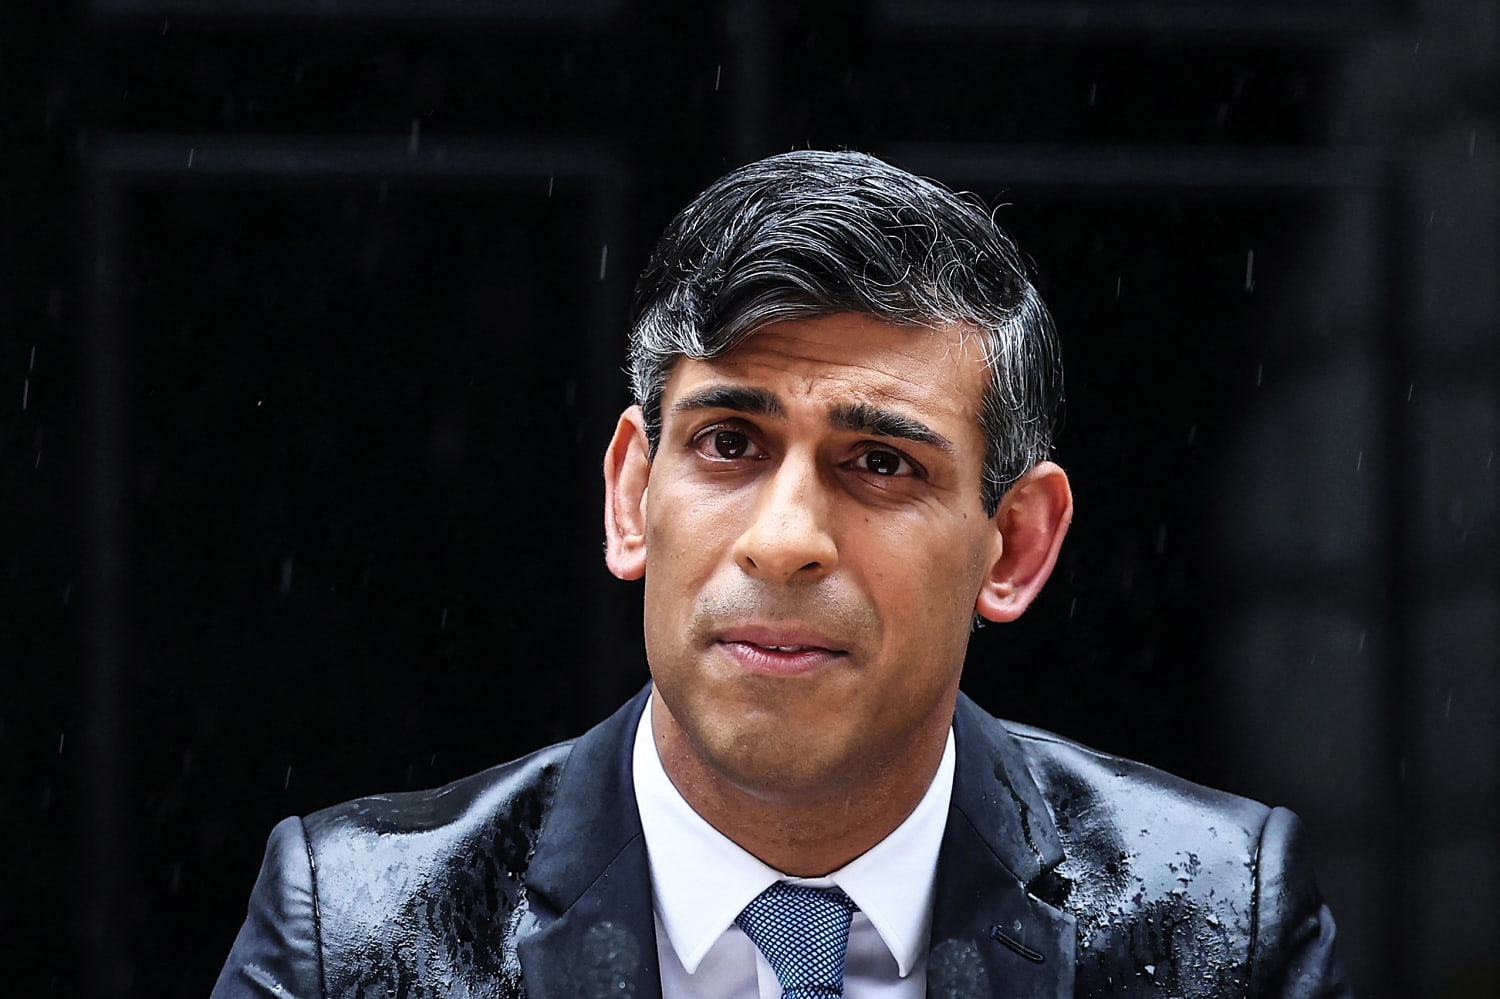 'Things can only get wetter': Why British PM Sunak called an election he's likely to lose